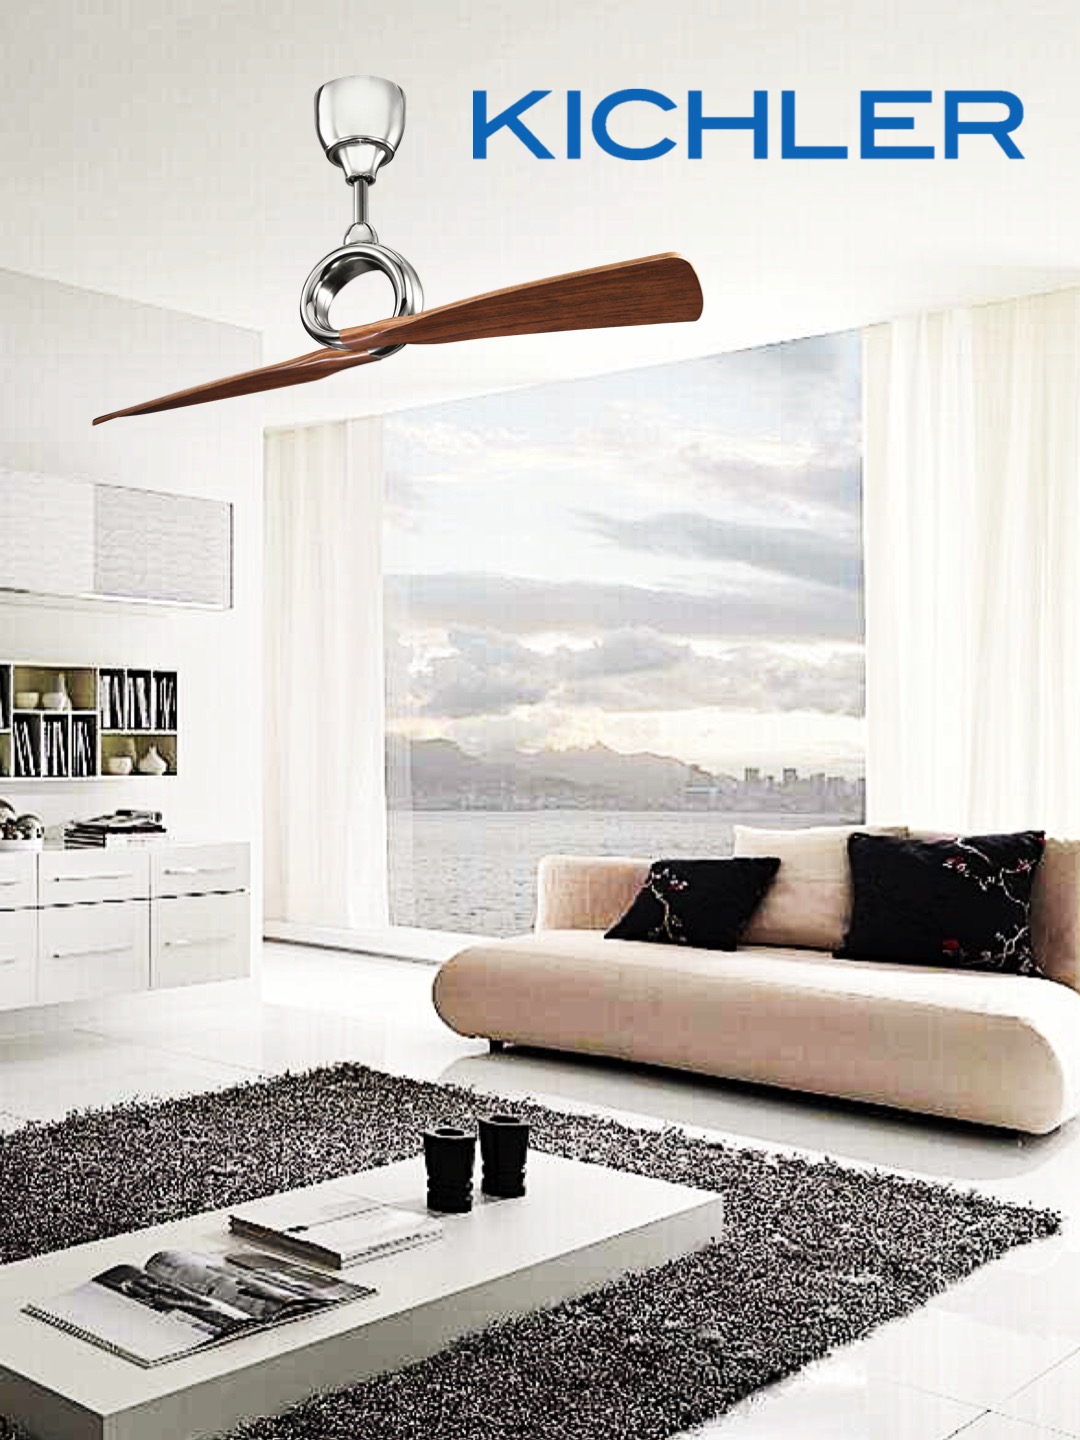 Kichler Ceiling Fan Style Pictures